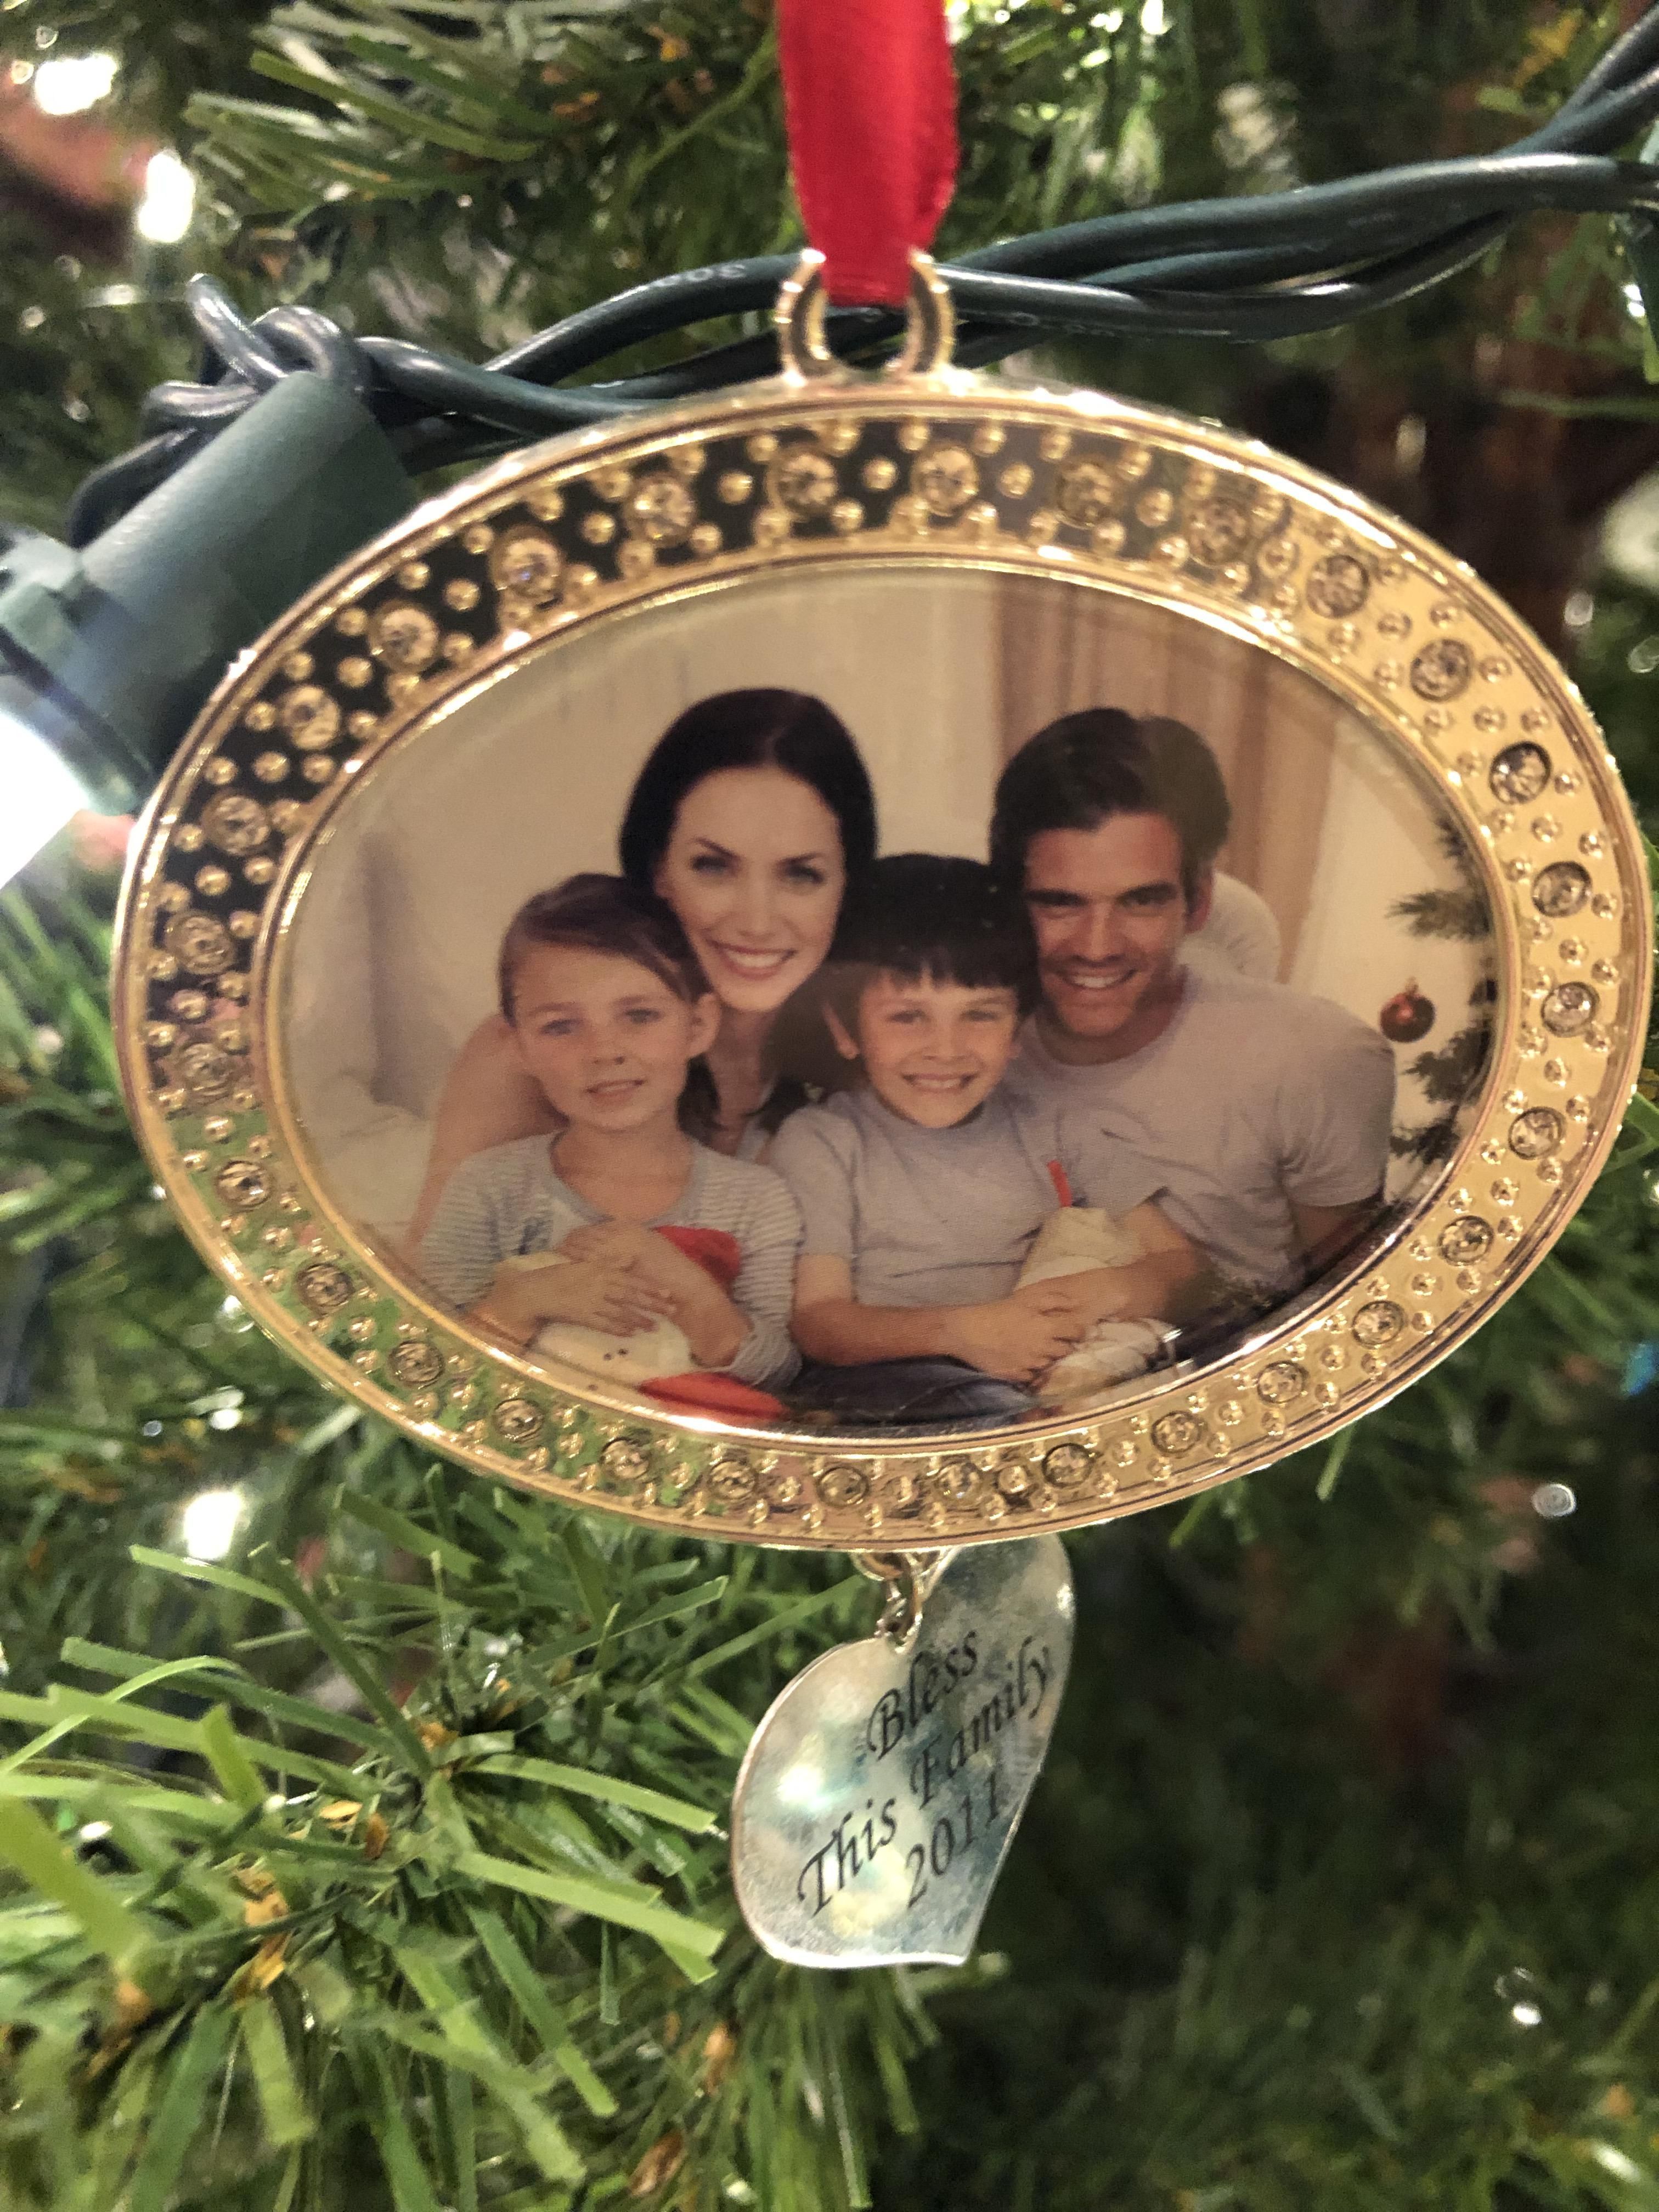 We bought this eight years ago and never replaced the picture. My sons calls it our alternate reality family Christmas pic.